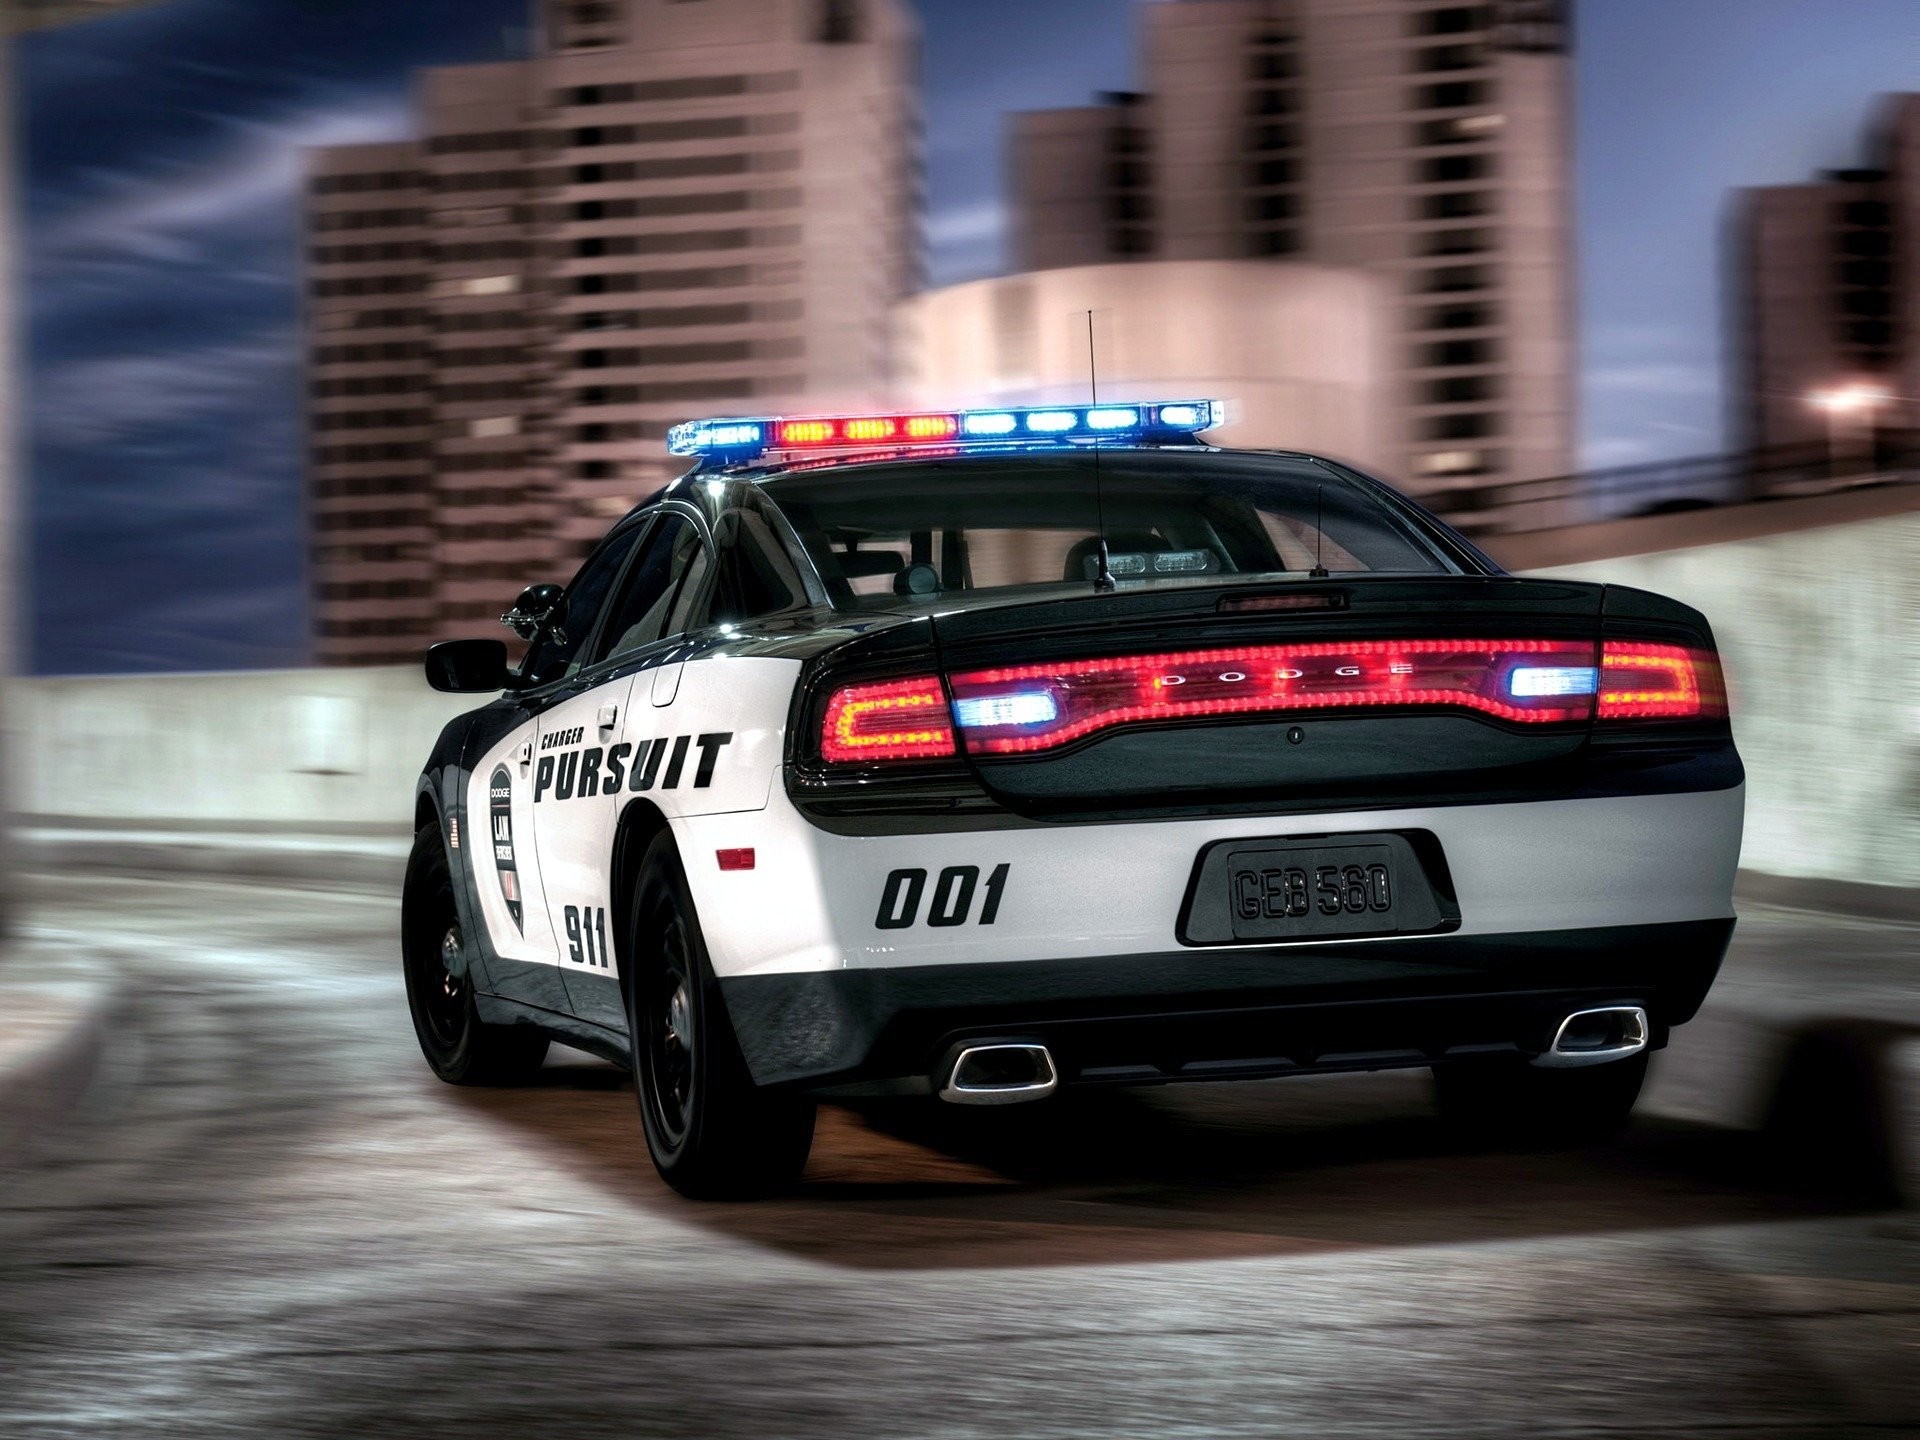 1920x1440 car wallpapers police dodge charger pursuit beautiful desktop vehicles  wallpapers dodge chardzher police machine